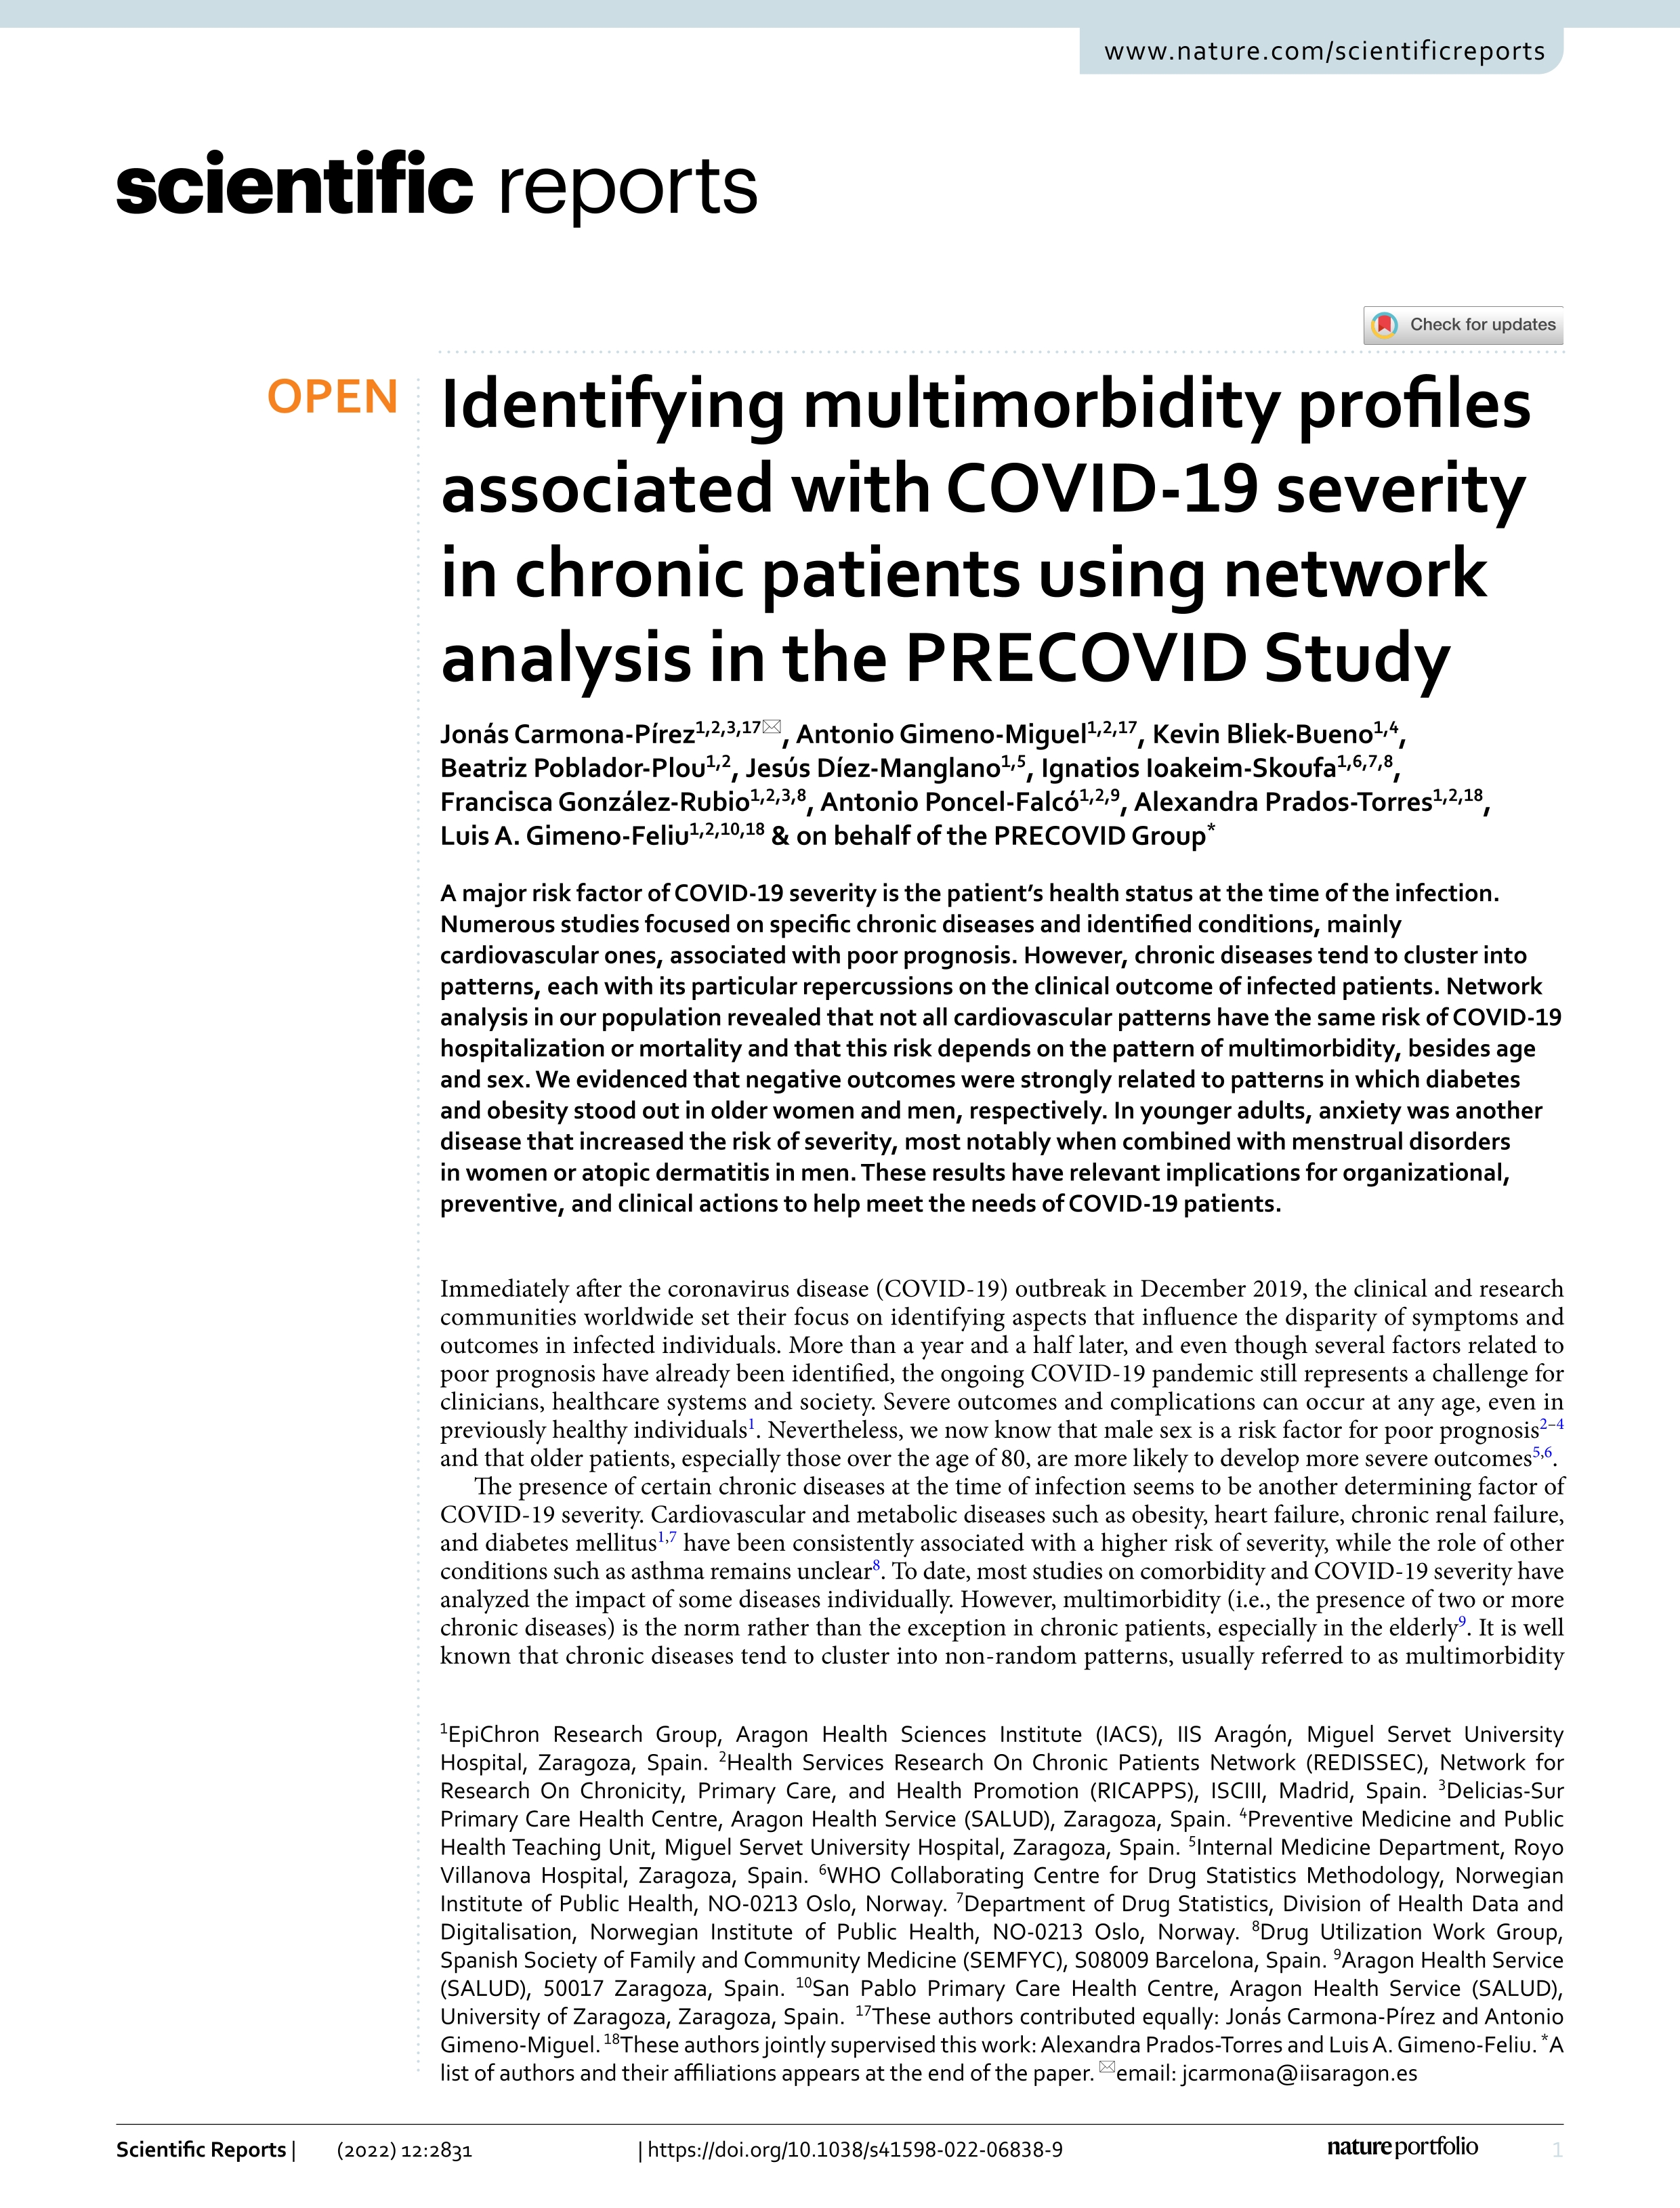 Identifying multimorbidity profiles associated with COVID-19 severity in chronic patients using network analysis in the PRECOVID Study; 35181720